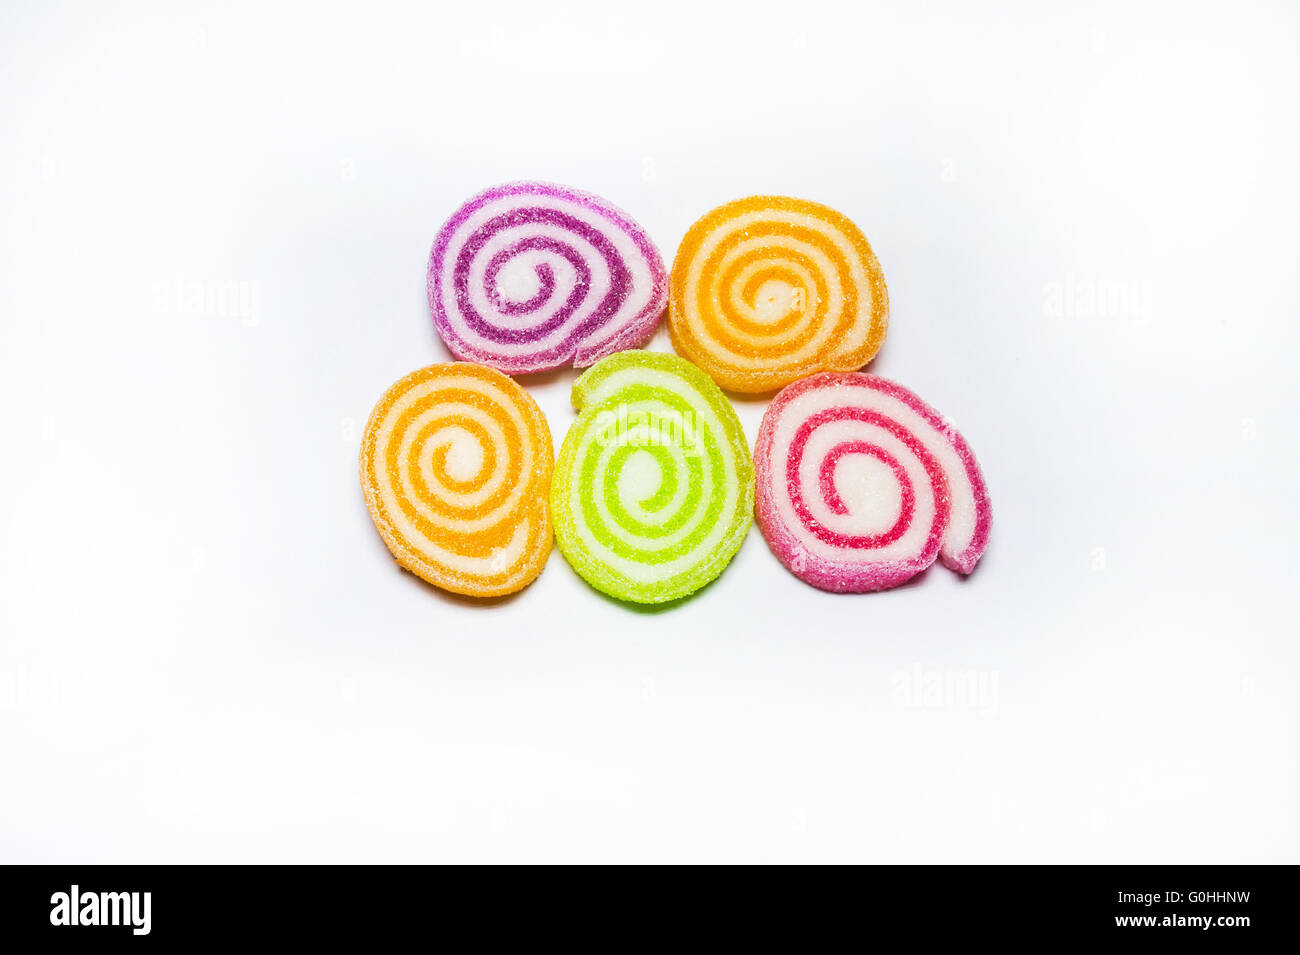 Colorful jelly candies on white Stock Photo